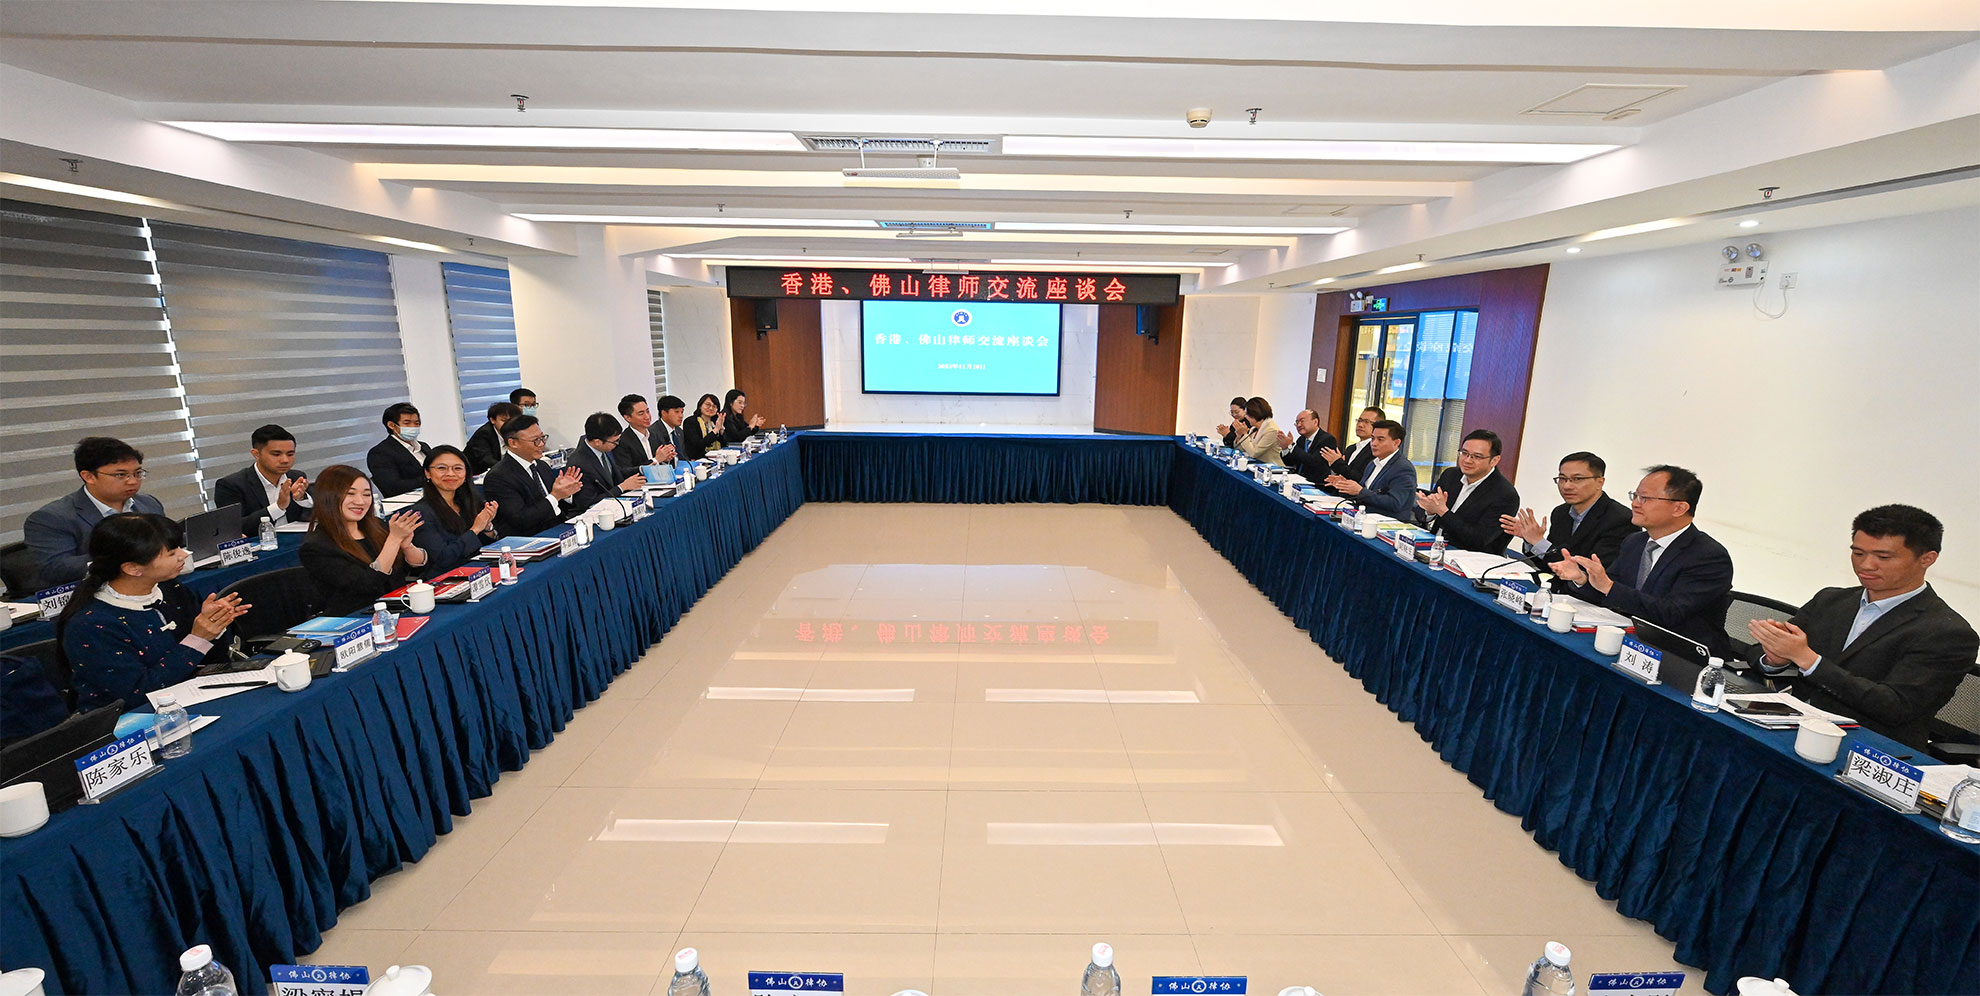 The Deputy Secretary for Justice, Mr Cheung Kwok-kwan and a delegation of young lawyers led by him today (November 18) called on the Foshan Lawyers Association. Photo shows Mr Cheung (first row, fourth left) and the delegation meeting with the Chief of Justice Bureau of Foshan Municipality, General Secretary of the Communist Party of the Justice Bureau, Mr Liu Zuhui (fourth right), and the President of Foshan Lawyers Association, Mr Zhang Xiaofeng (second right).